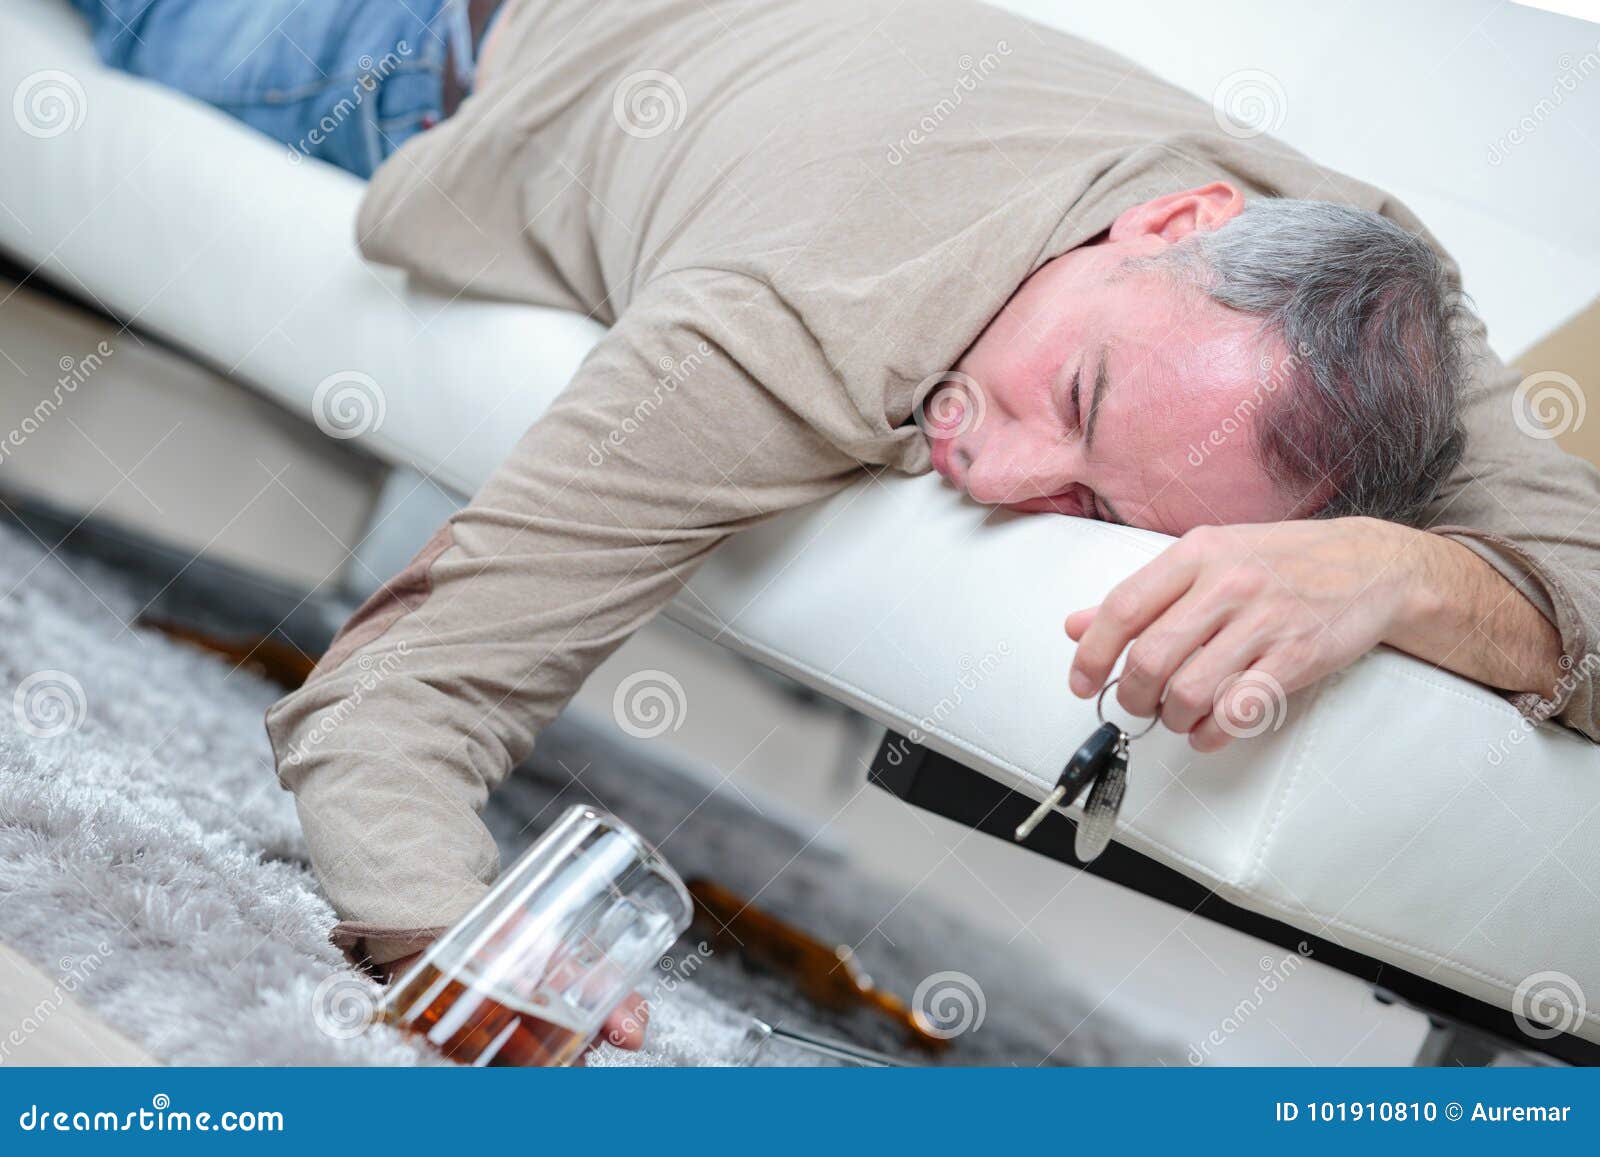 Drunk Businessman Sleeping with Beer on Sofa Stock Photo - Image of ...